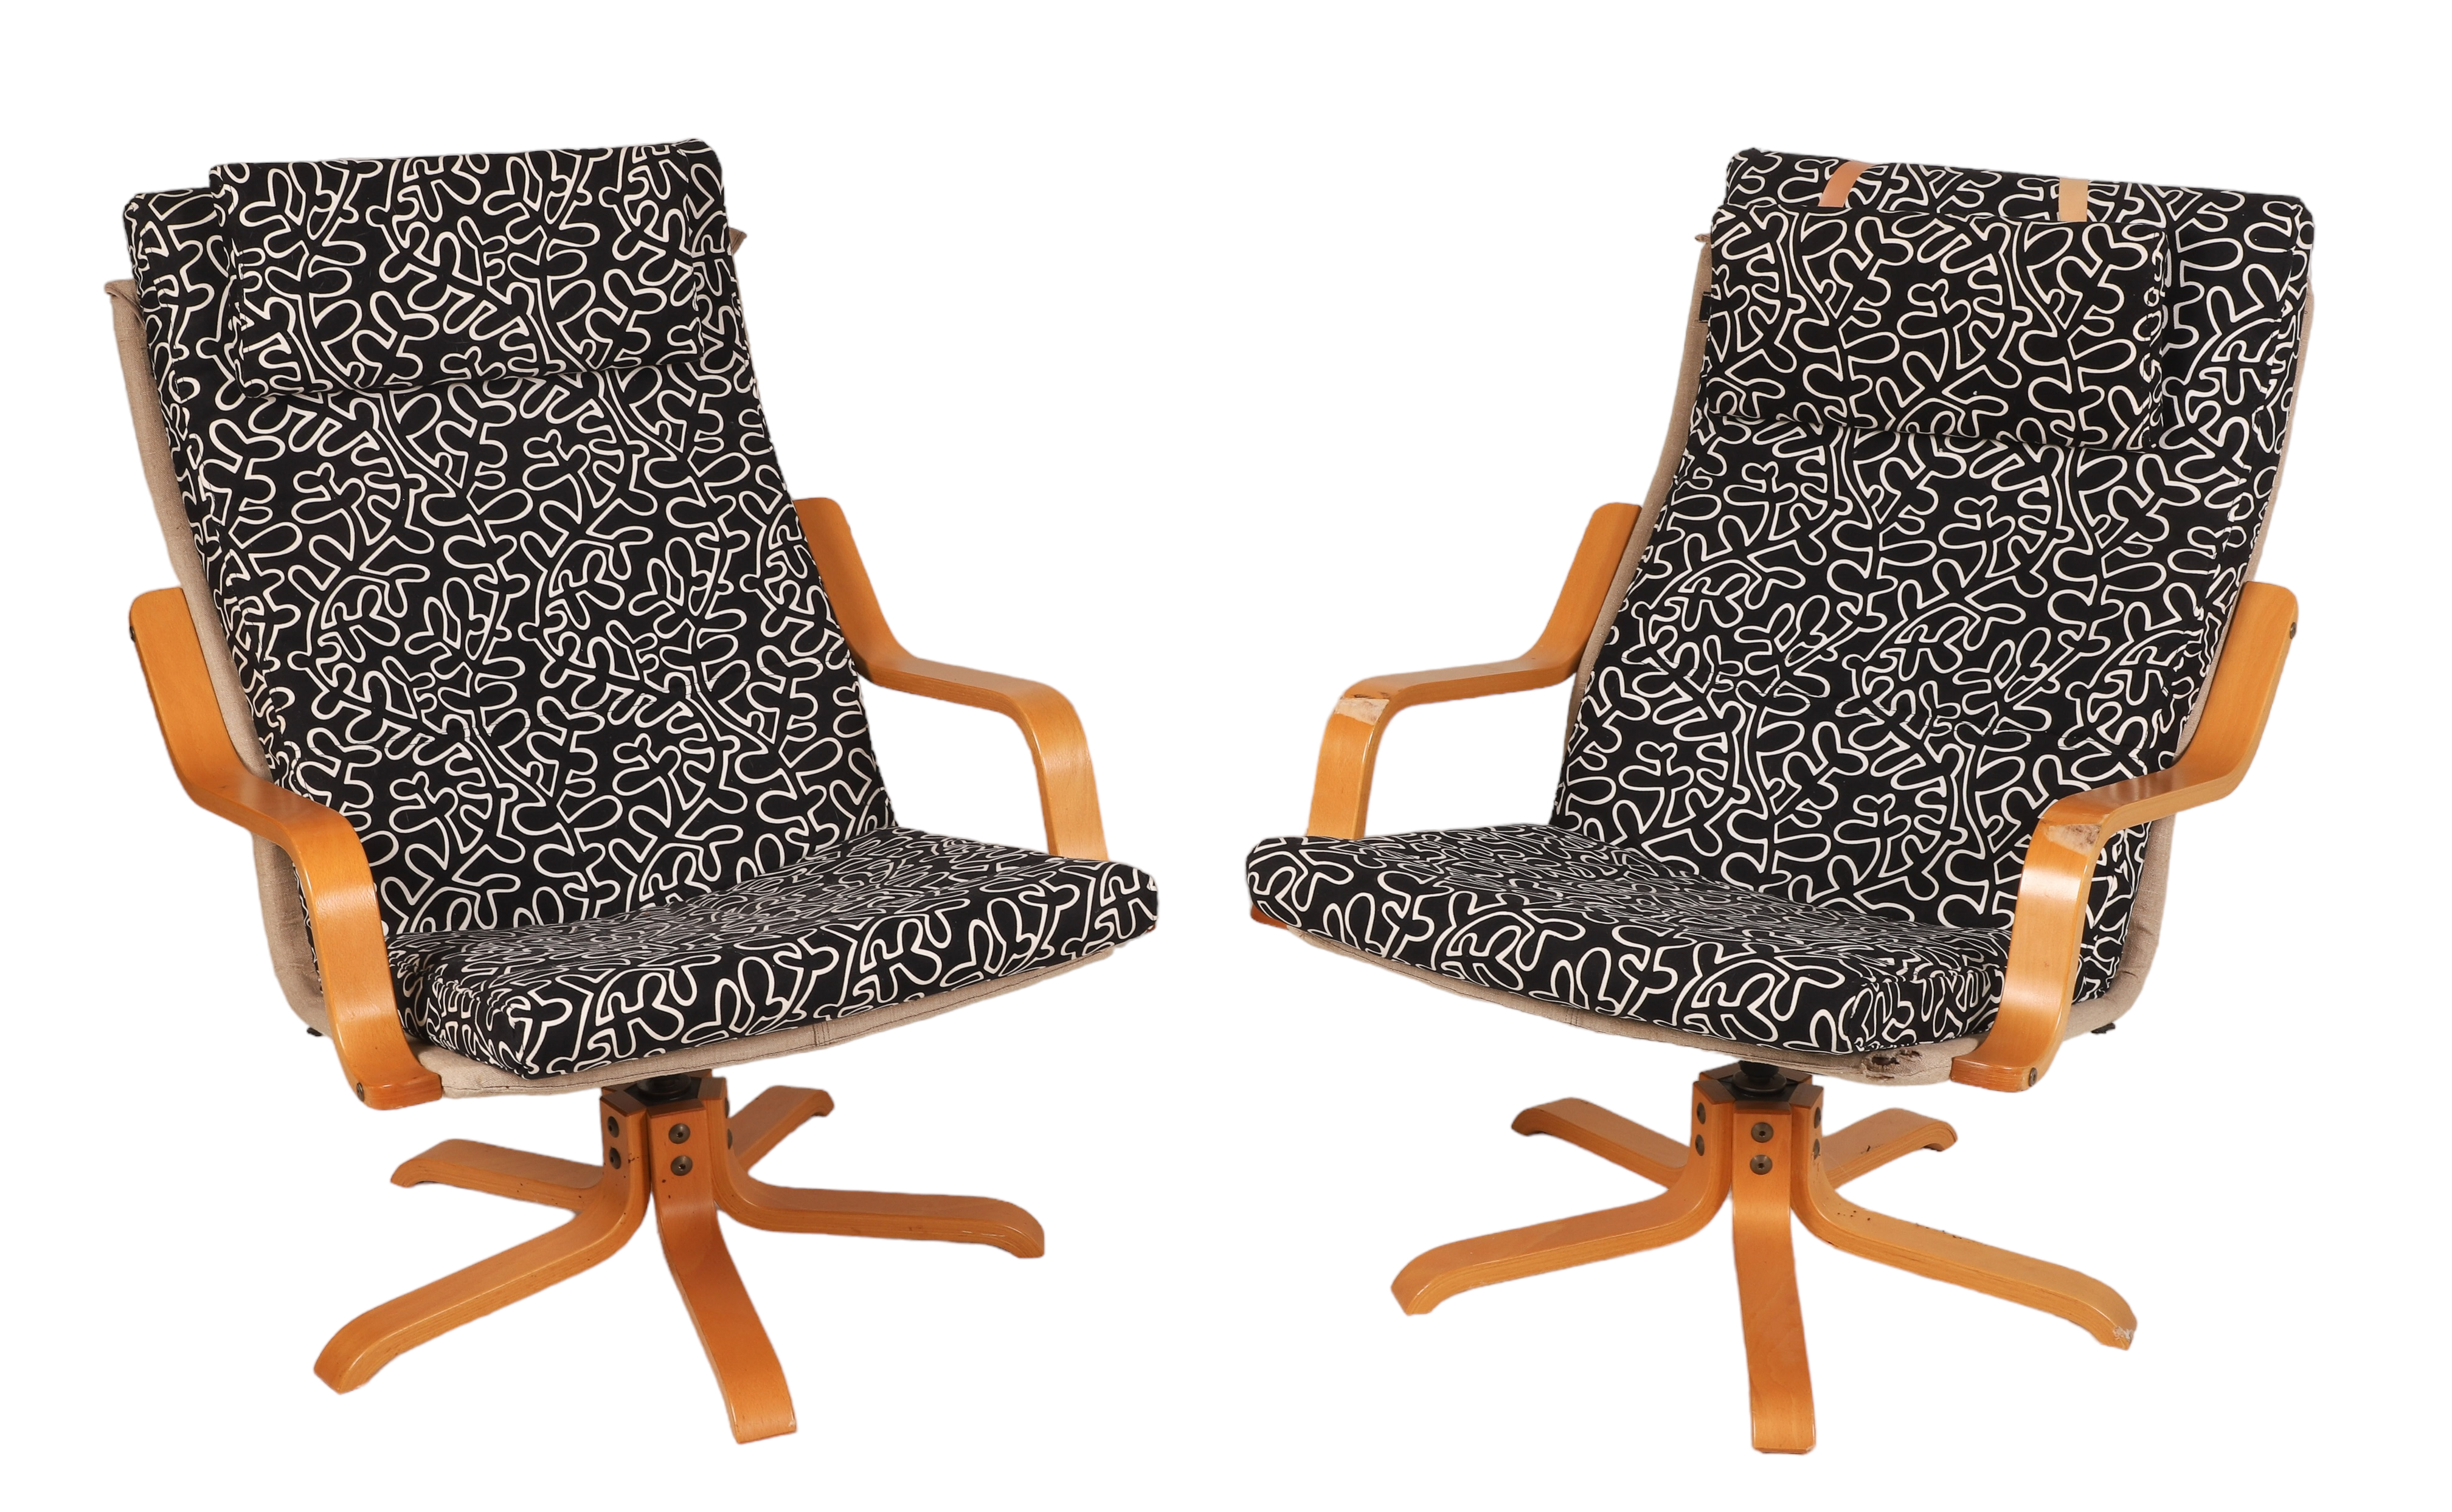 Pair Ikea bentwood lounge chairs,